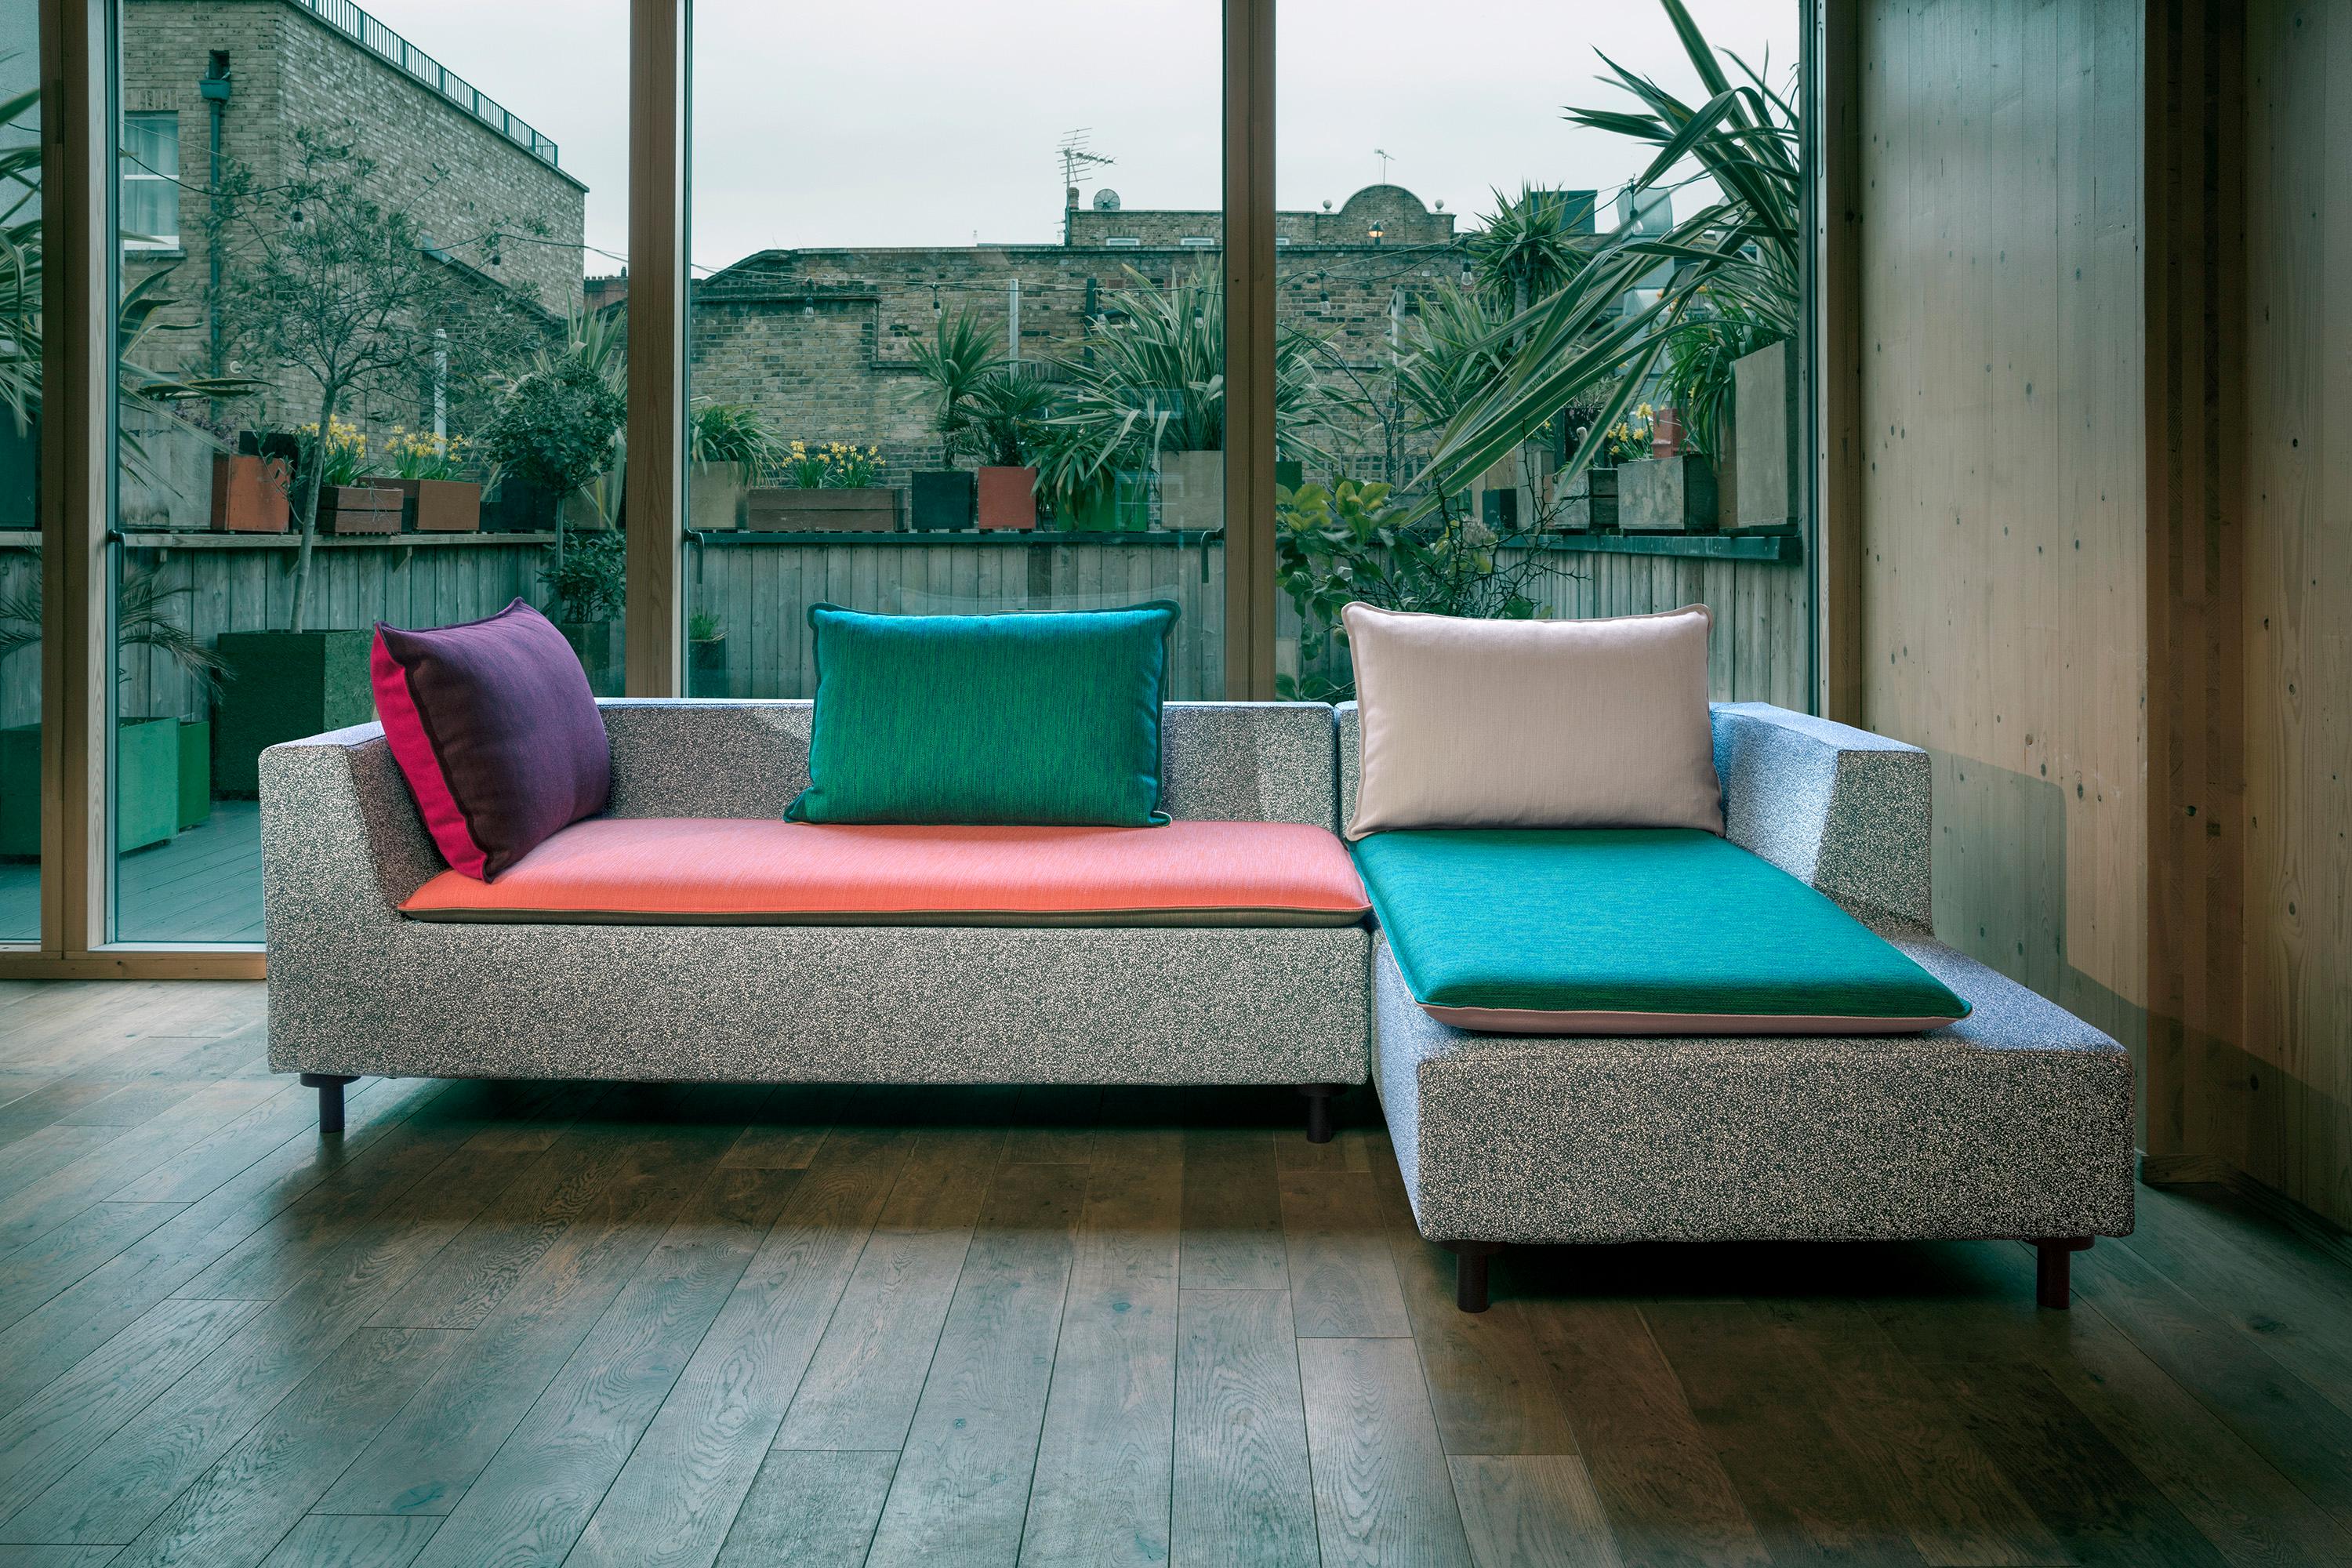 Konstantin Grcic has created a compact, geometric divan with a purity of form and a big personality that offers a modern, Minimalist update on the traditional chaise. The compact design fills a space between a sofa and a daybed, a gap where there